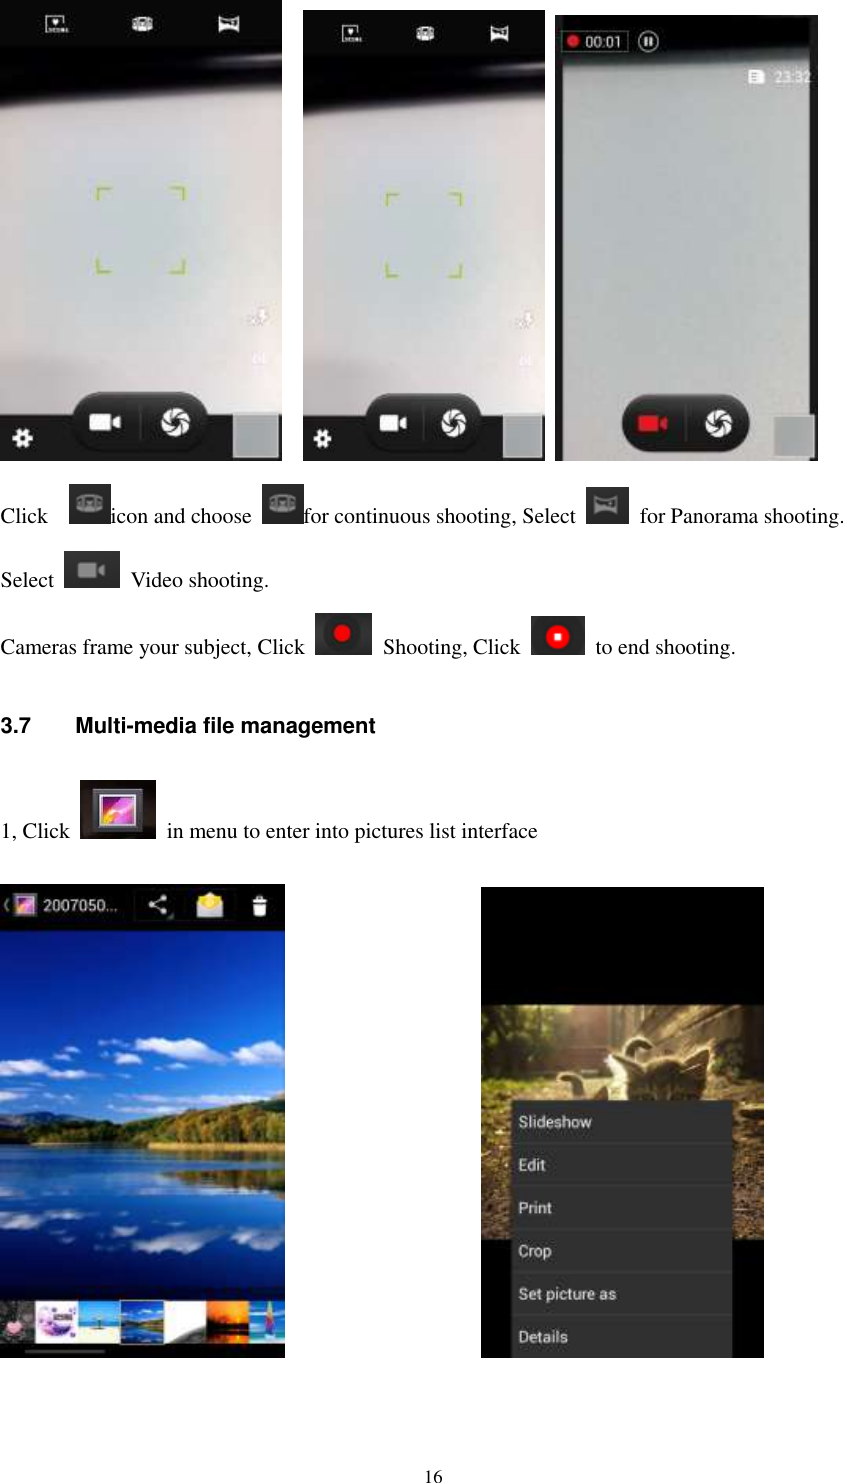   16       Click   icon and choose  for continuous shooting, Select   for Panorama shooting. Select   Video shooting.   Cameras frame your subject, Click   Shooting, Click    to end shooting. 3.7  Multi-media file management 1, Click    in menu to enter into pictures list interface                                  